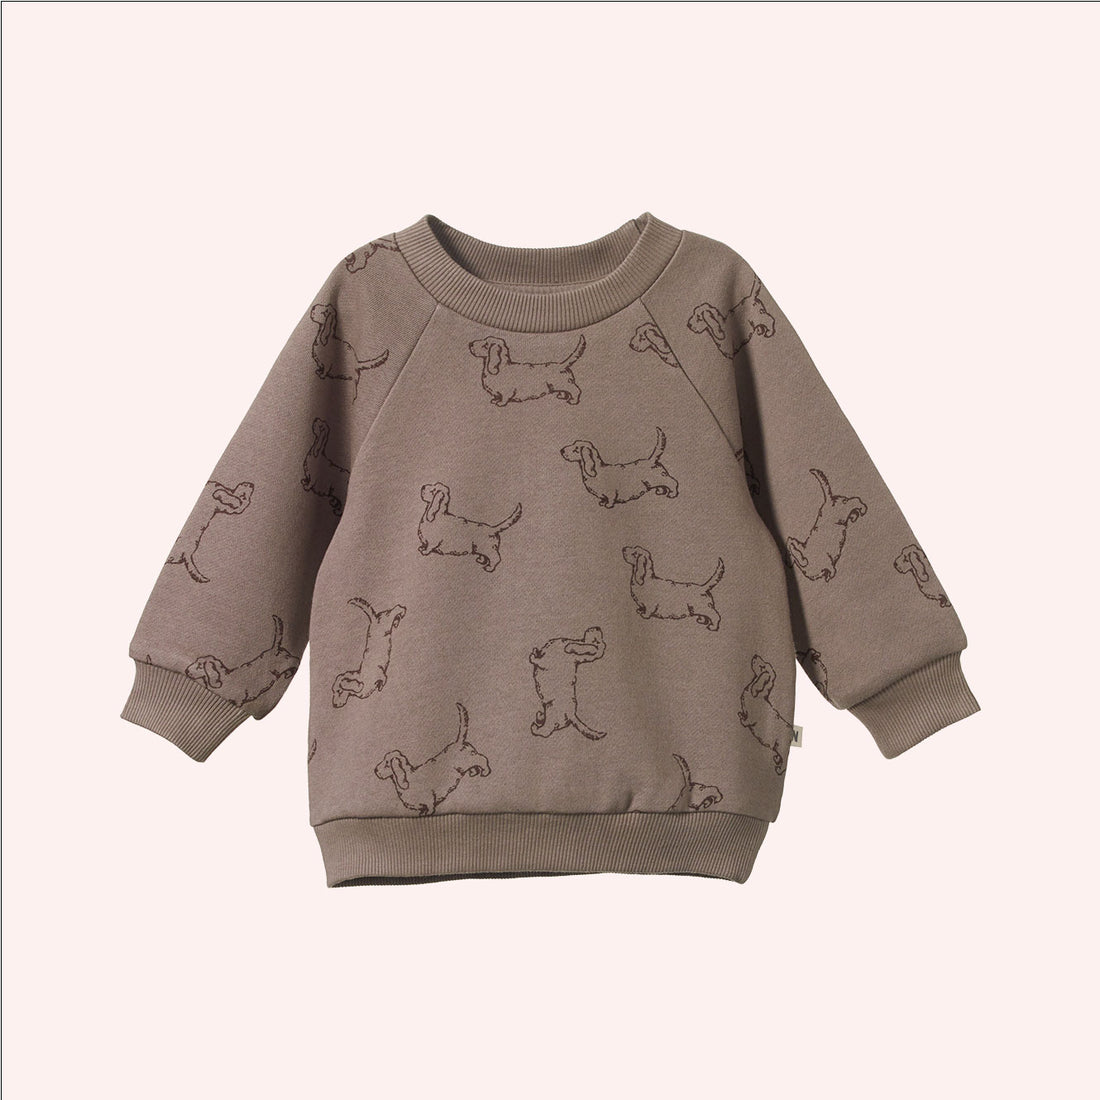 Emerson Sweater - Happy Hounds Print